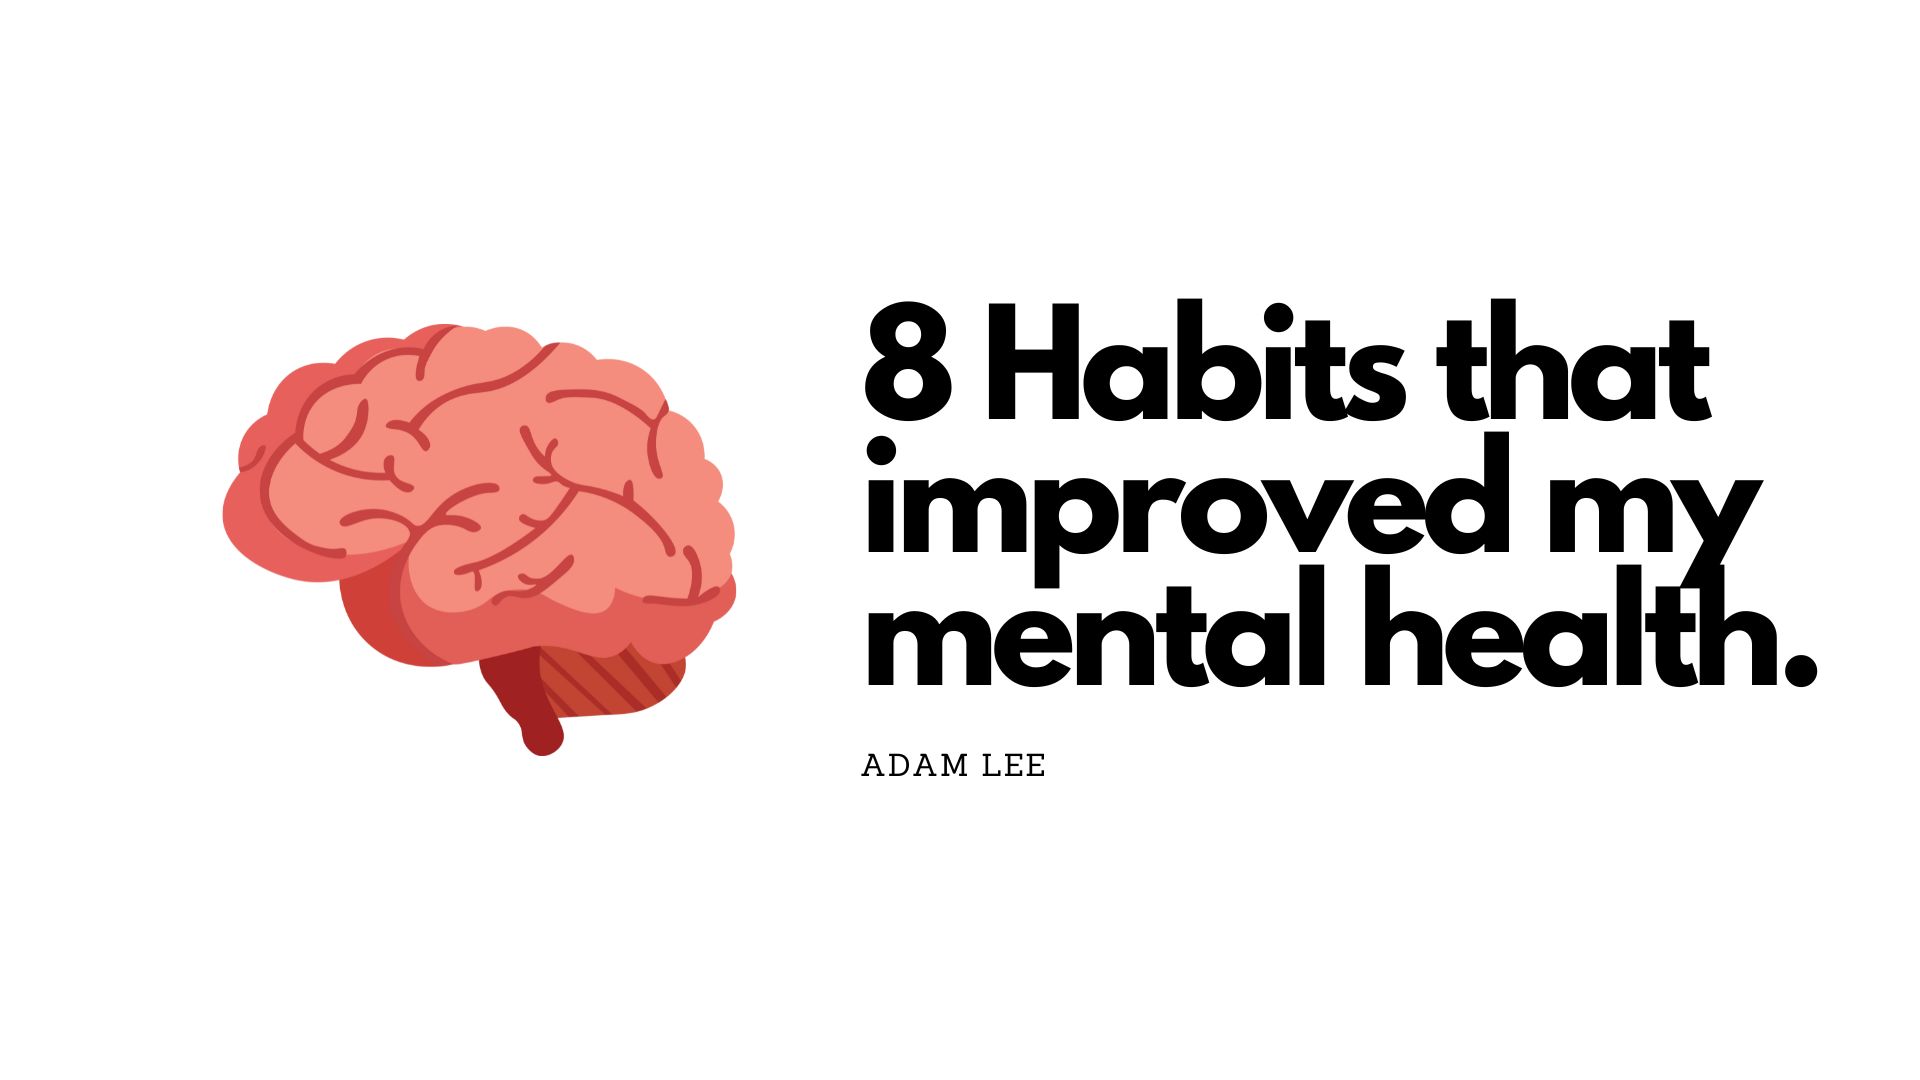 8 Habits that improved my mental health.